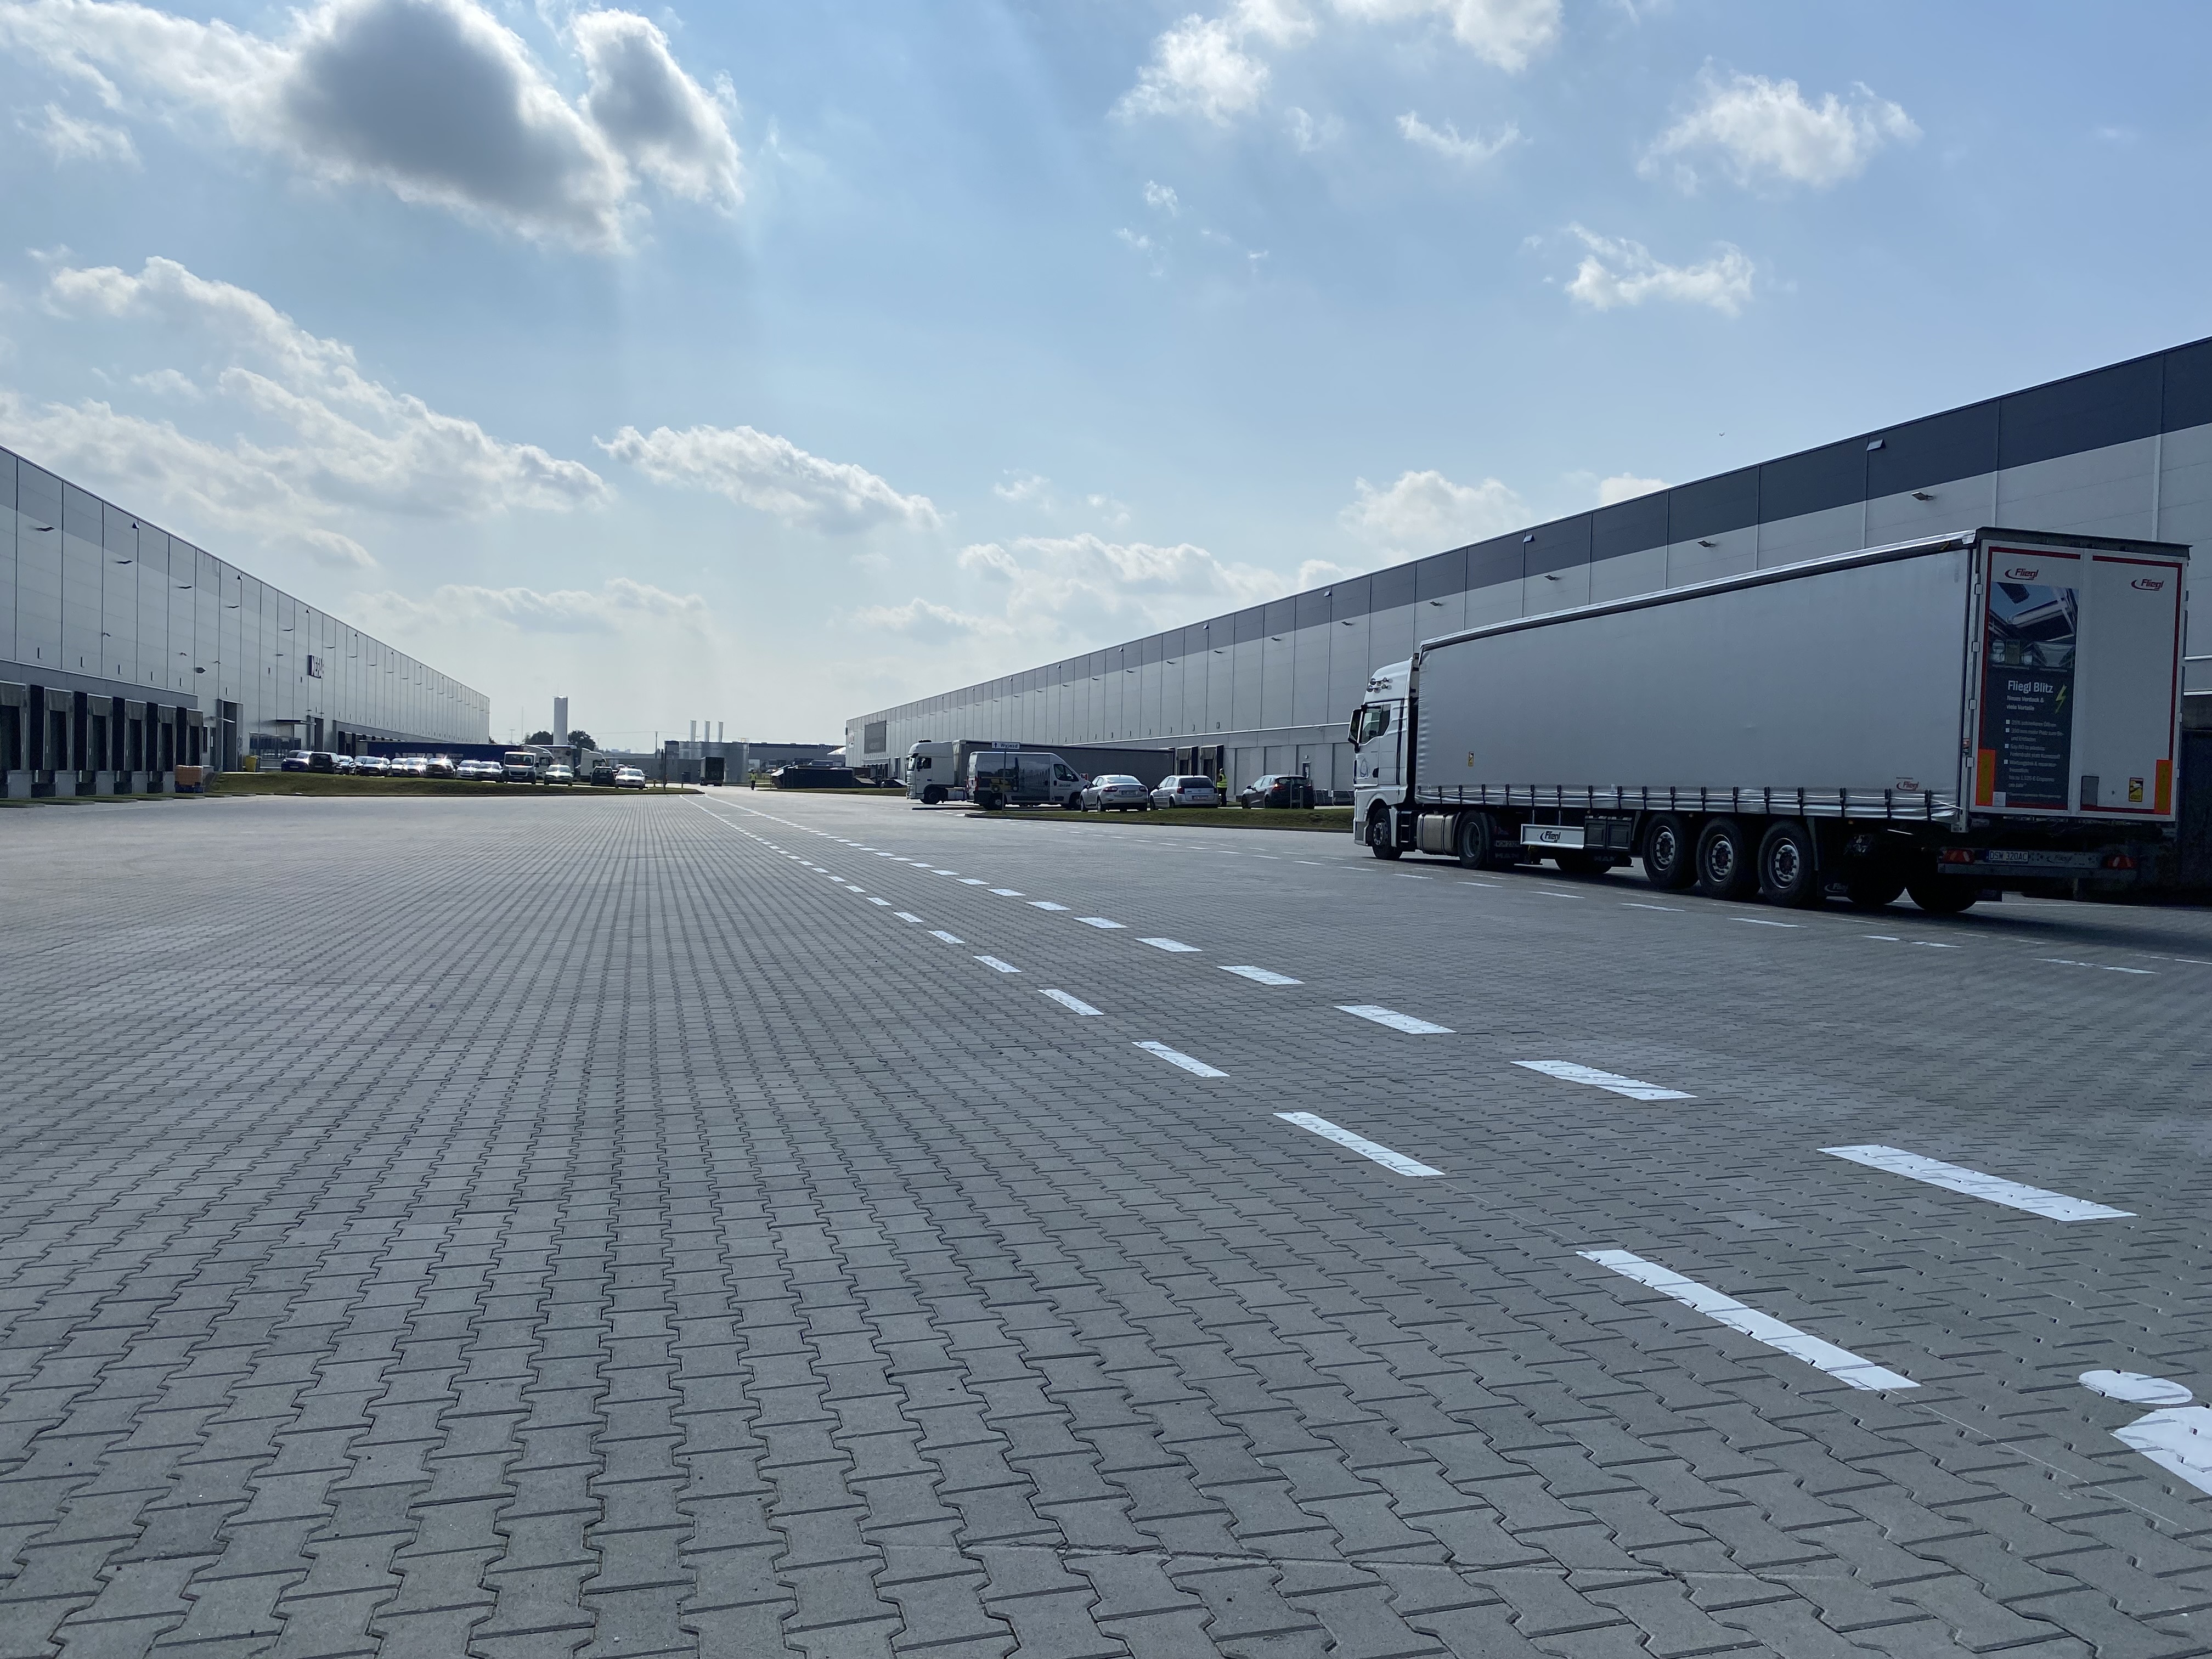 road showing warehouse on each side with a few trucks and cars